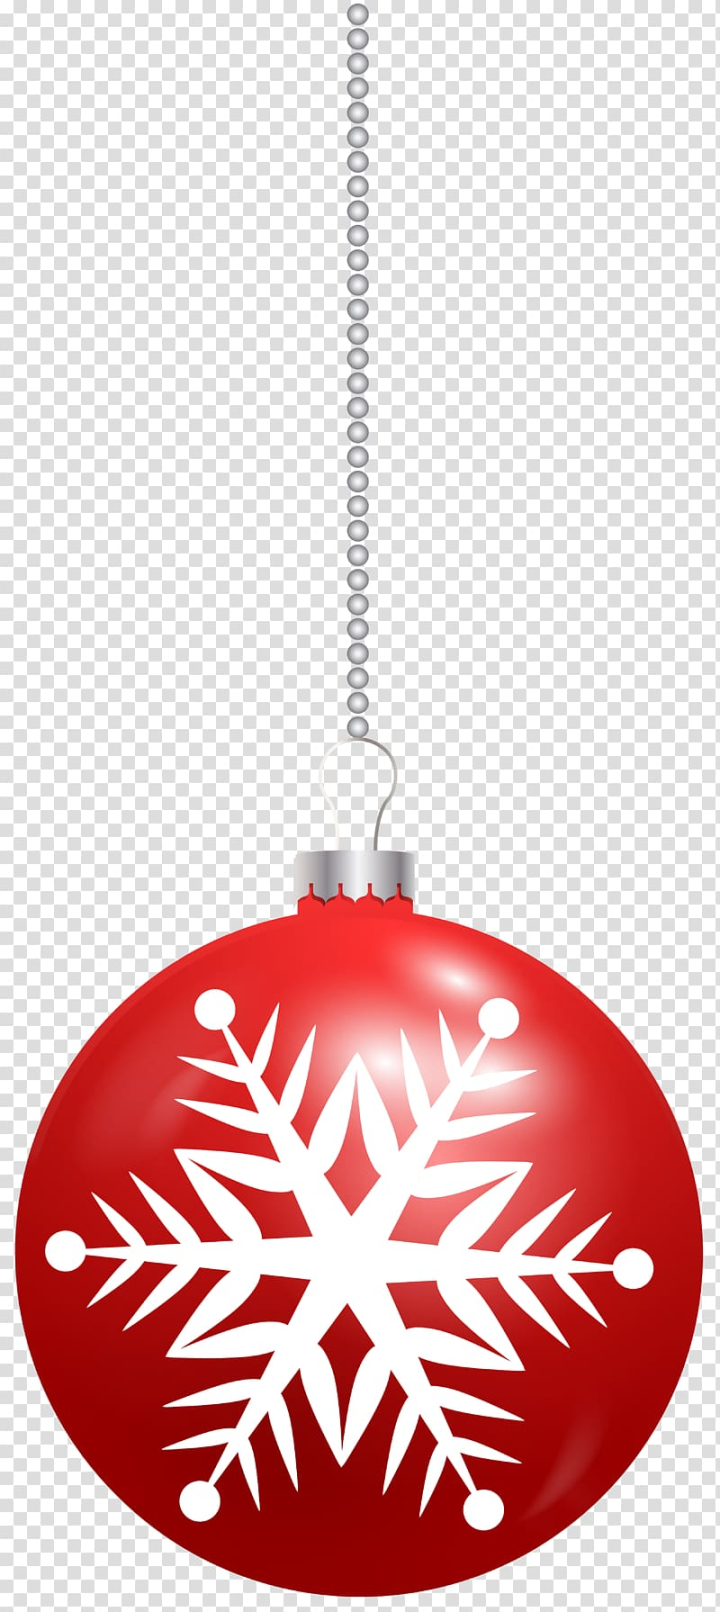 volvo,trucks,christmas,ball,christmas decoration,encapsulated postscript,royaltyfree,image resolution,font,computer icons,christmas tree,christmas ornament,christmas clipart,xmas clipart,volvo trucks,snowflake,art - christmas,christmas ball,png clipart,free png,transparent background,free clipart,clip art,free download,png,comhiclipart